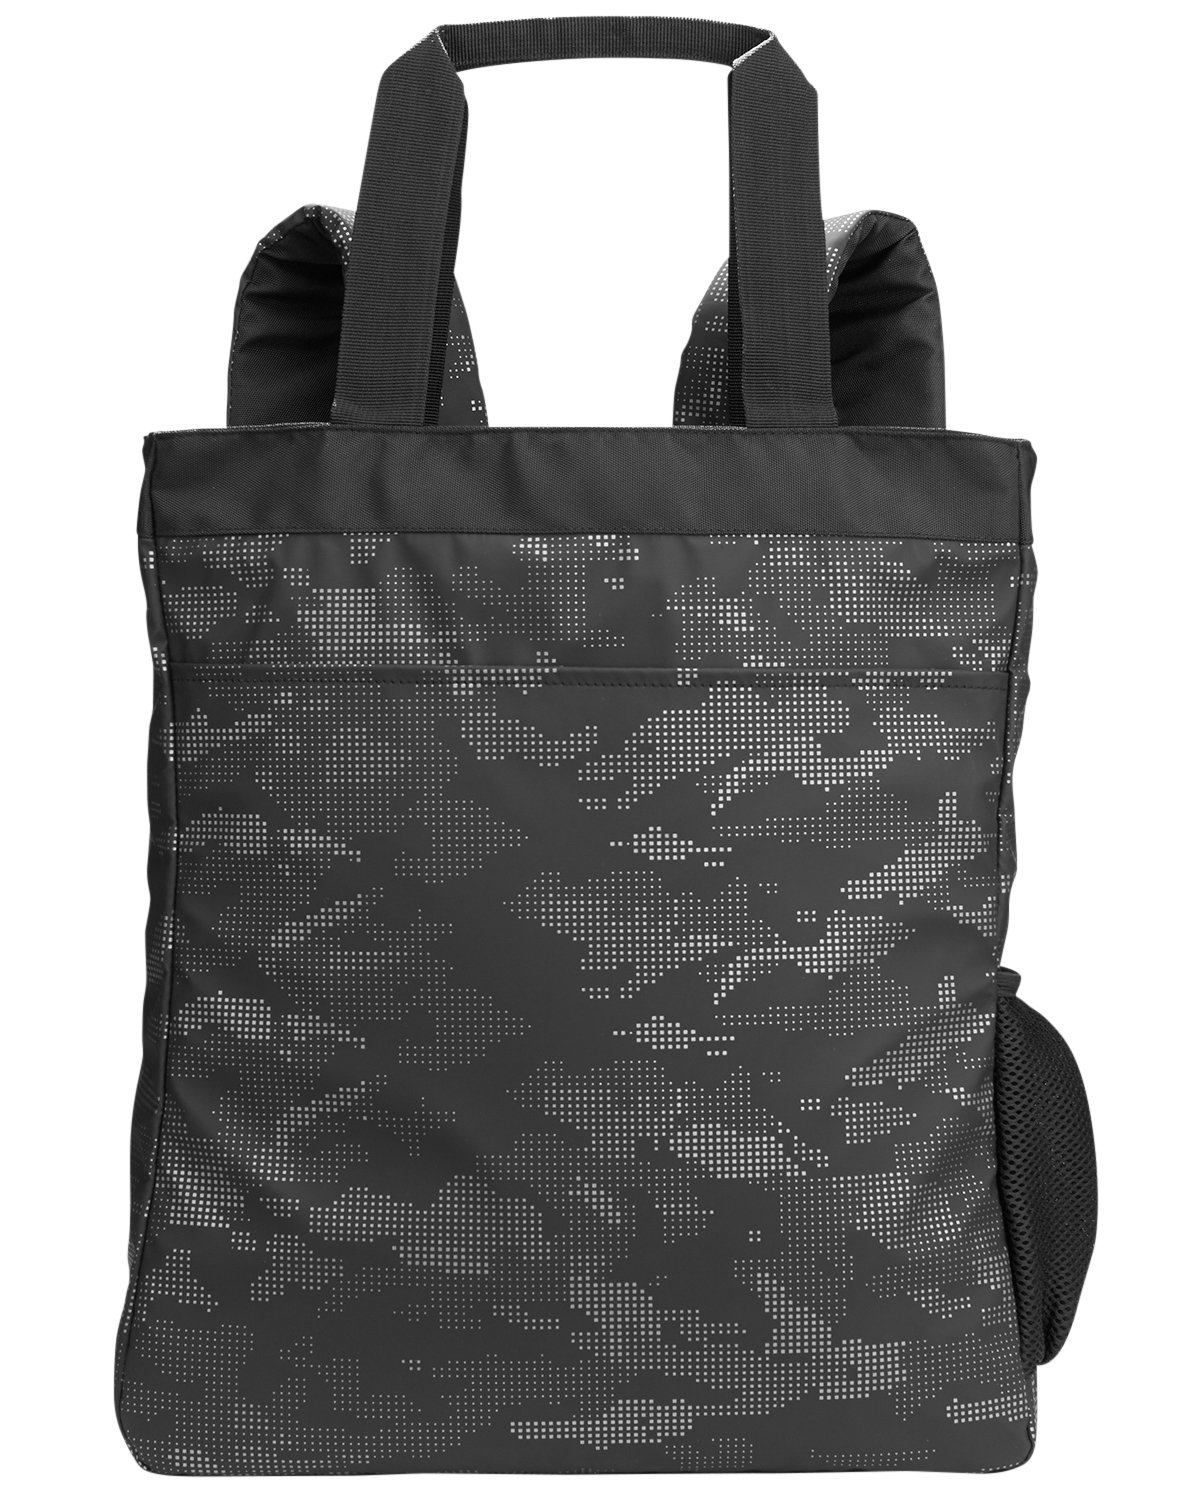 North End Convertible Backpack Tote BLACK/ CARBON 